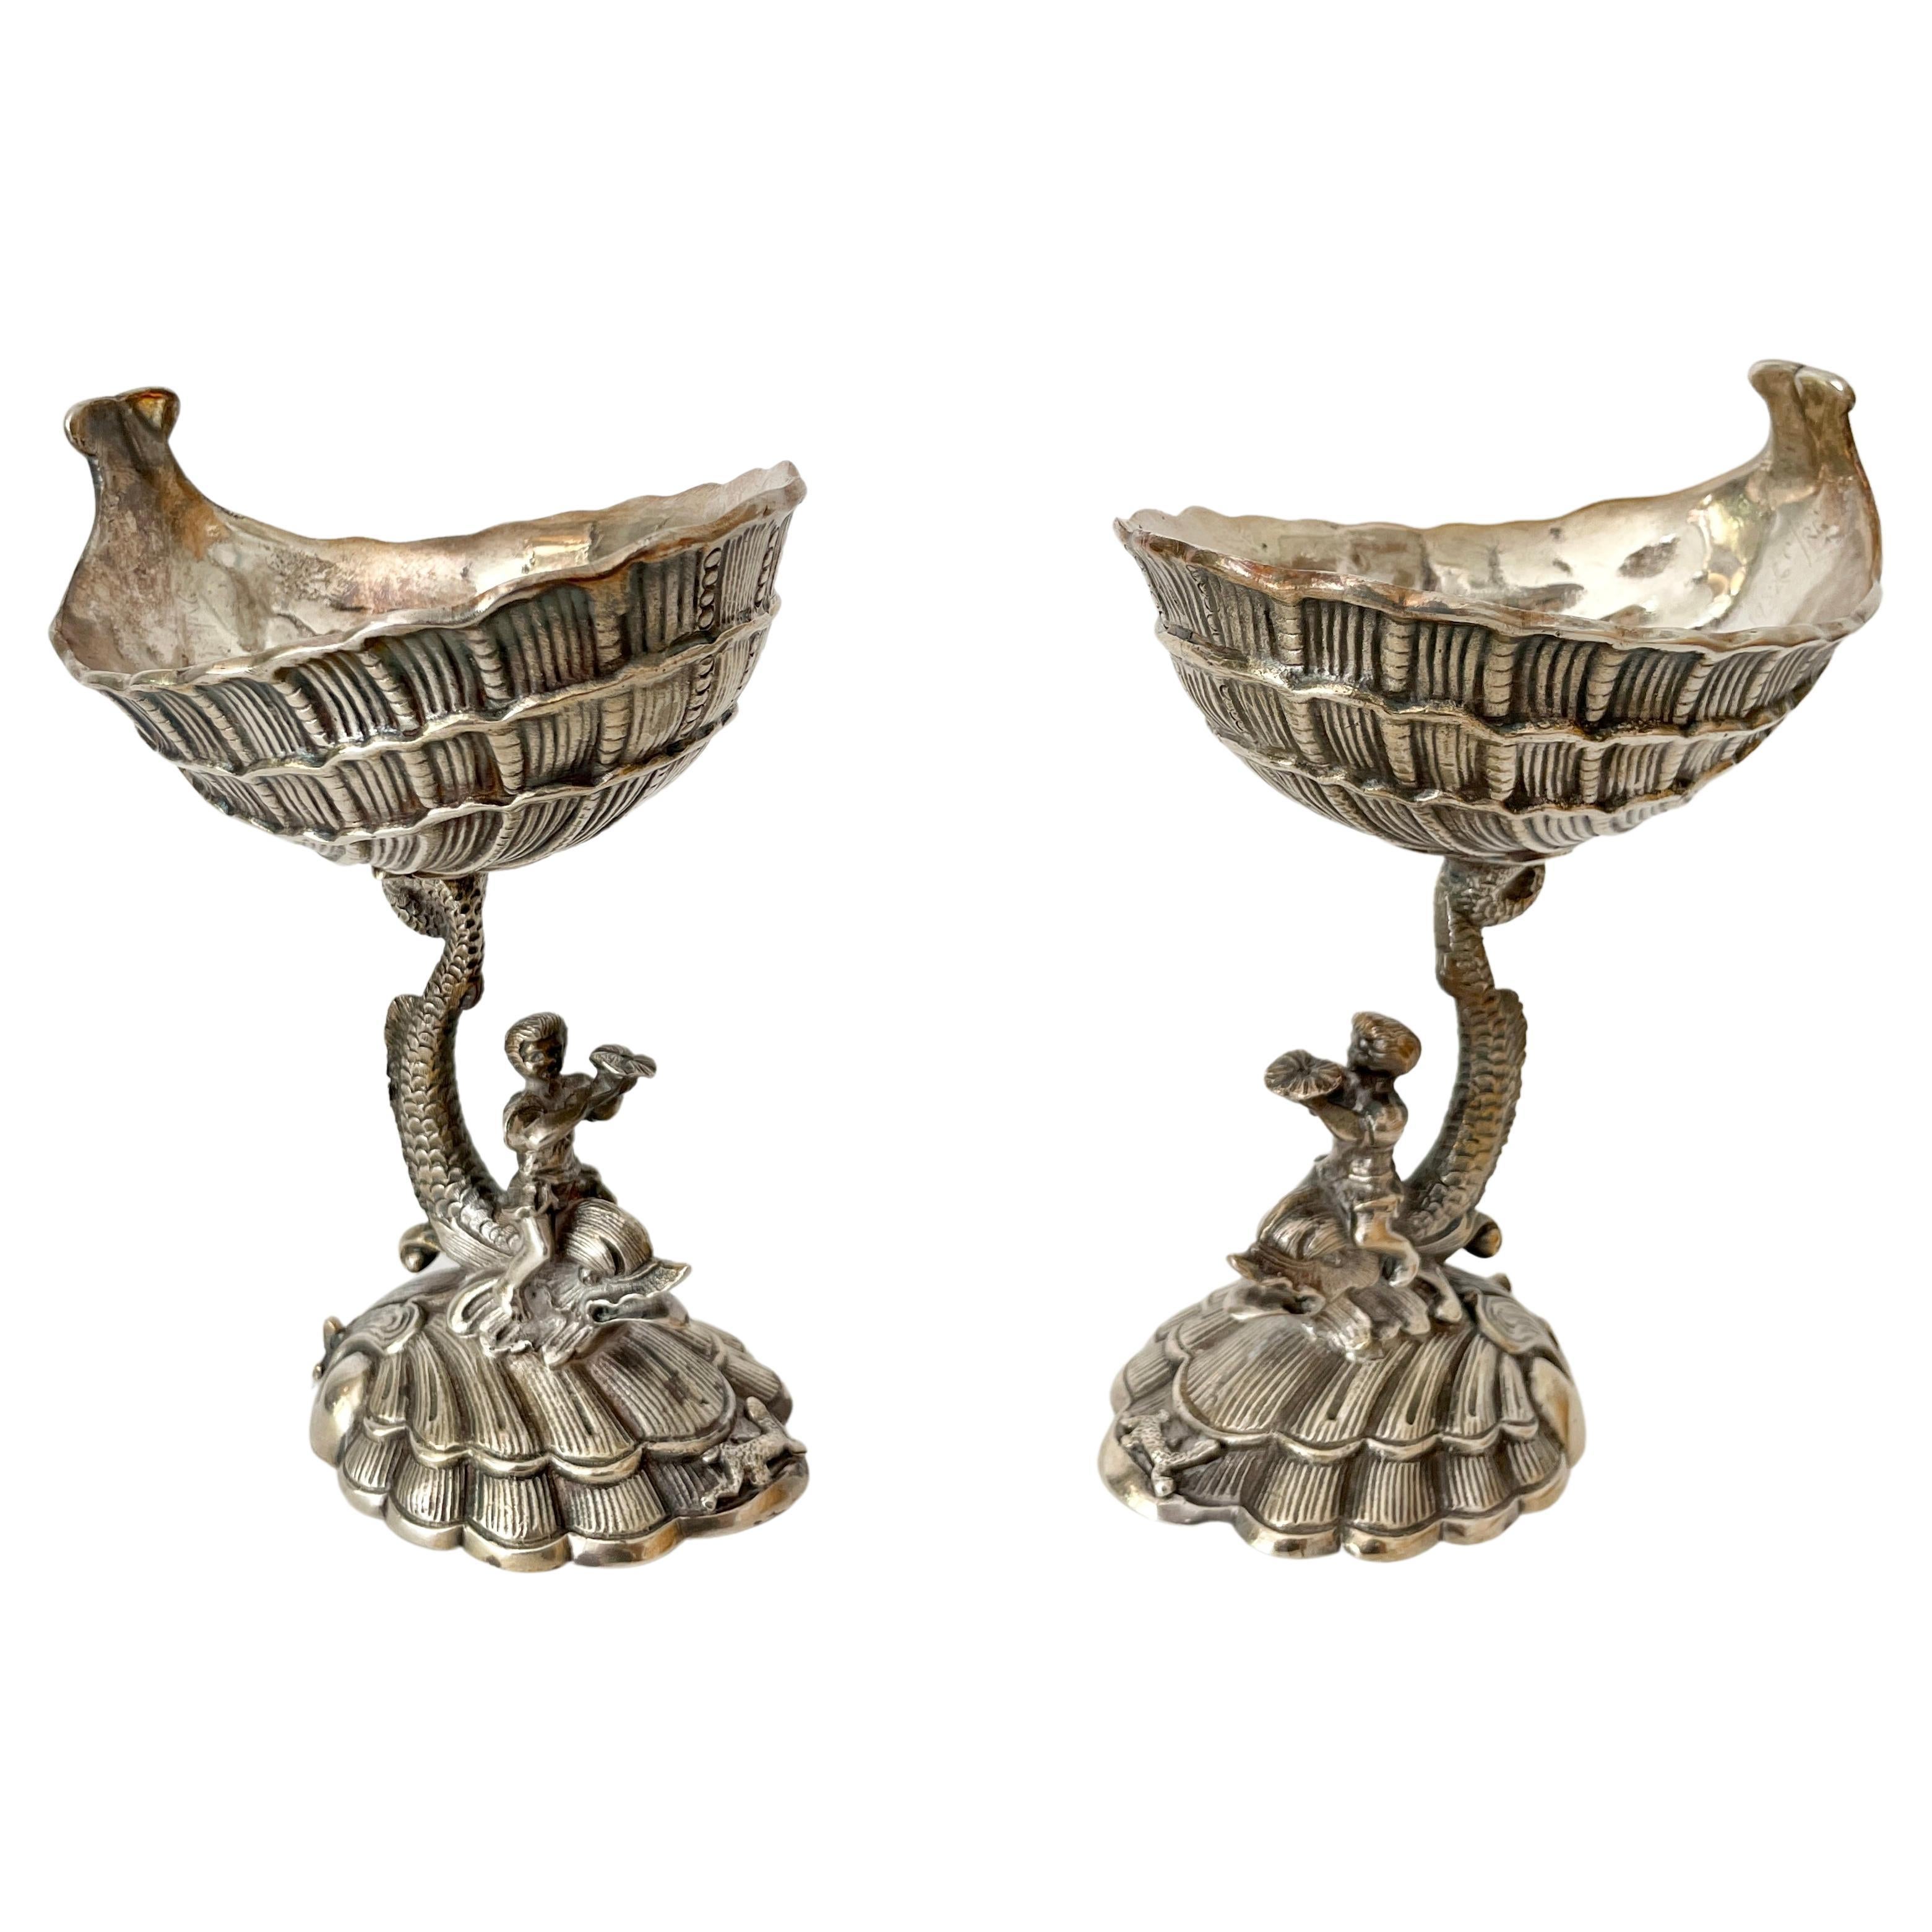 Grotto Metal Footed Dish, a Pair